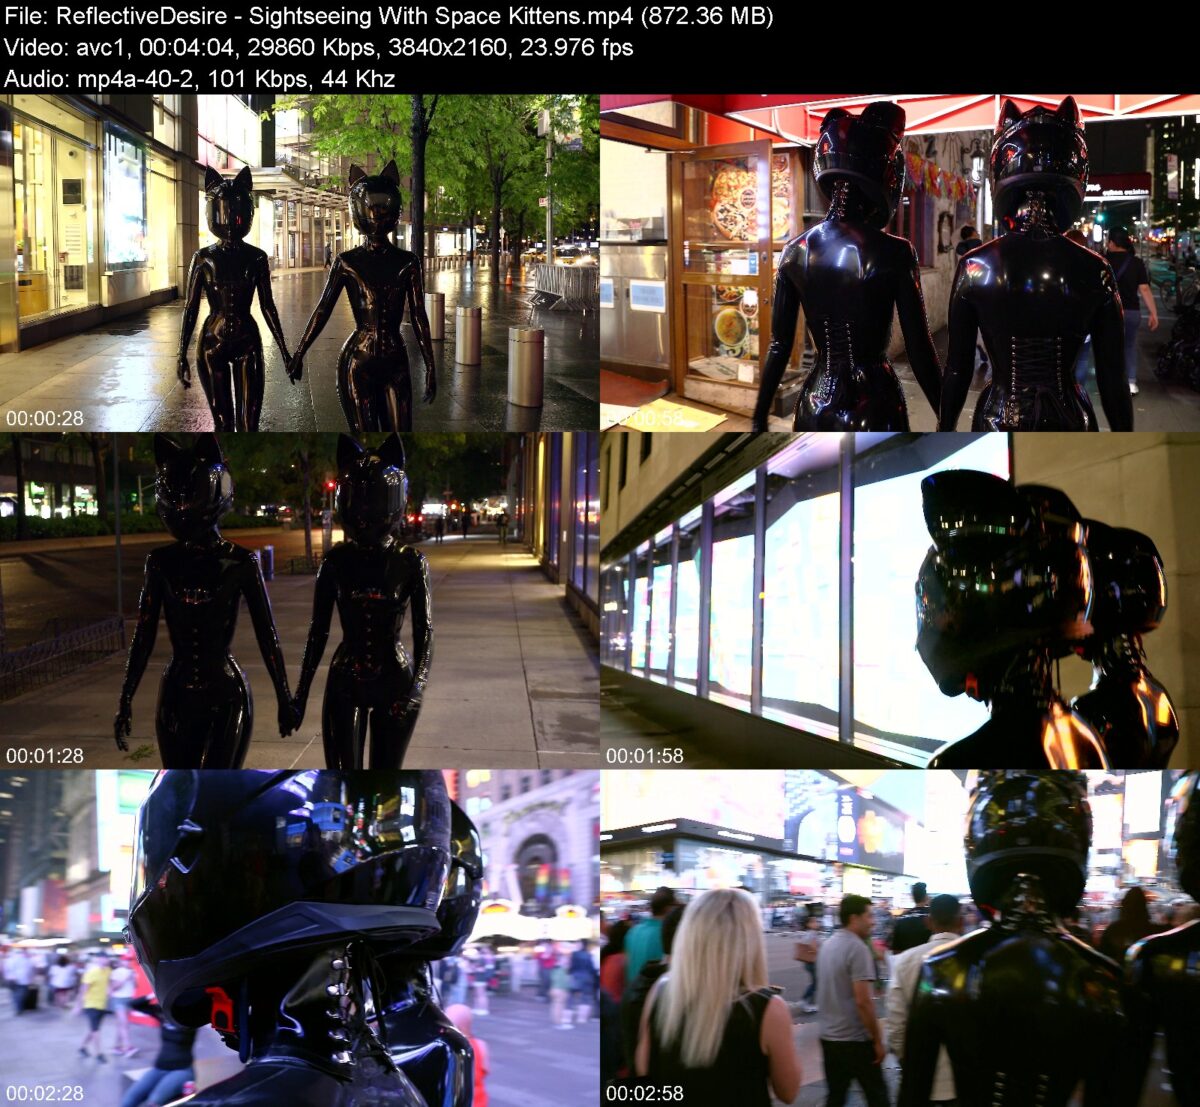 Actress: ReflectiveDesire. Title and Studio: Sightseeing With Space Kittens